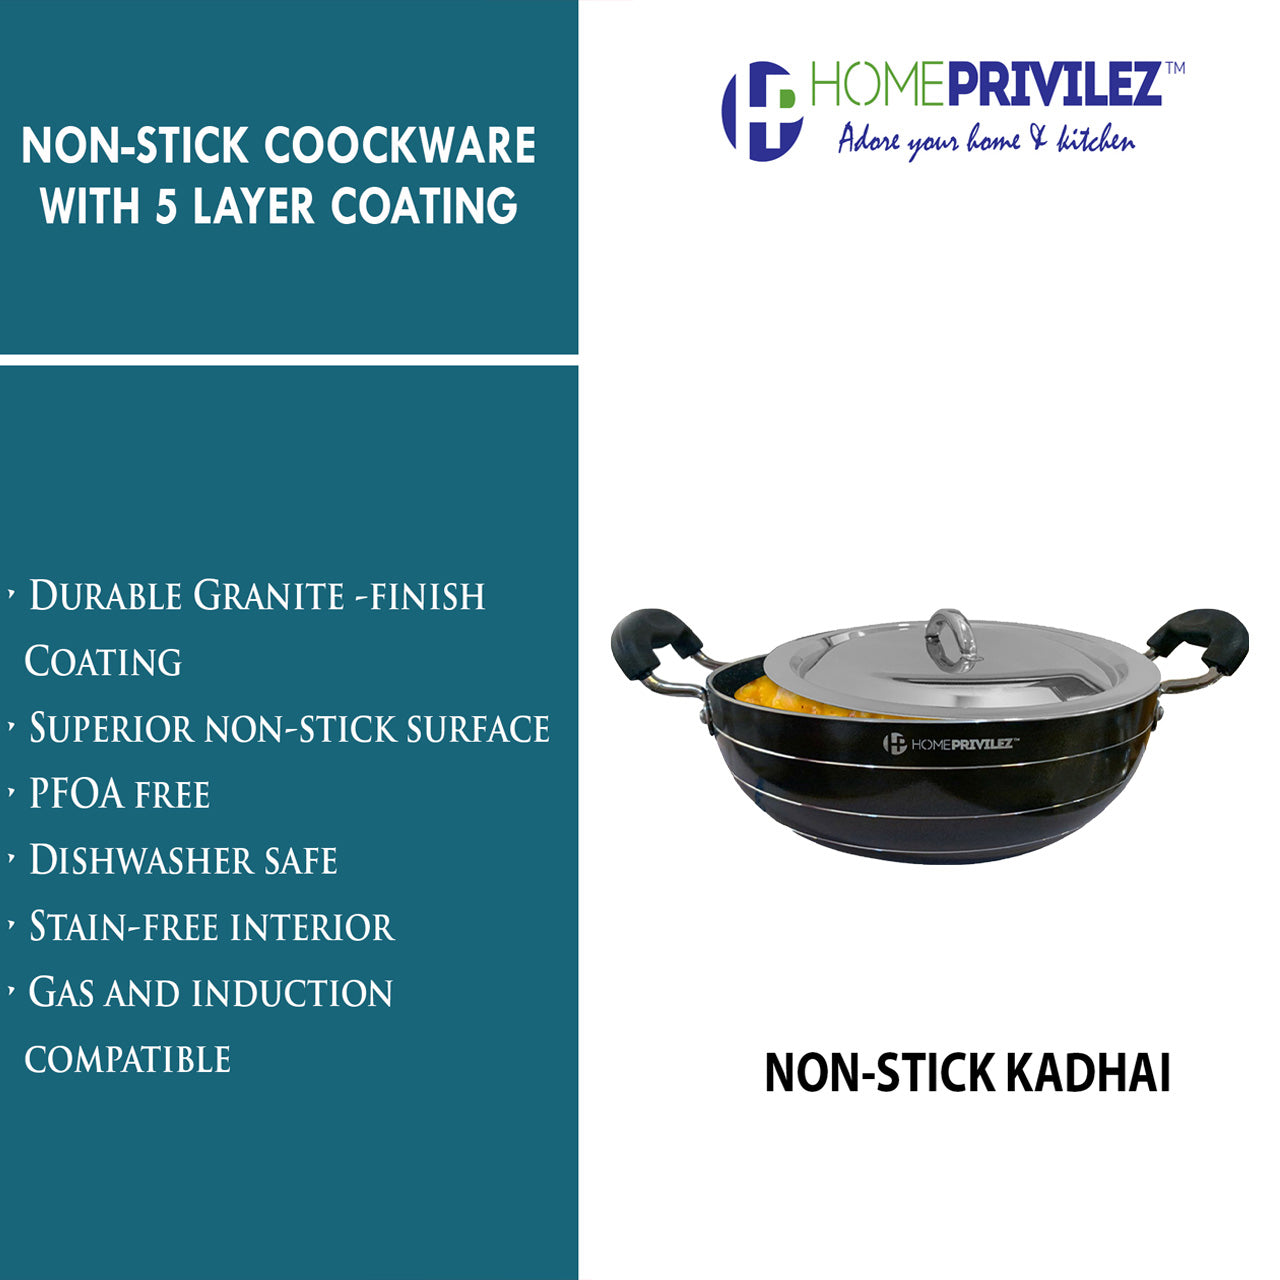 Non-Stick Induction KADHAI (5-layer granite coating) with SS Lid